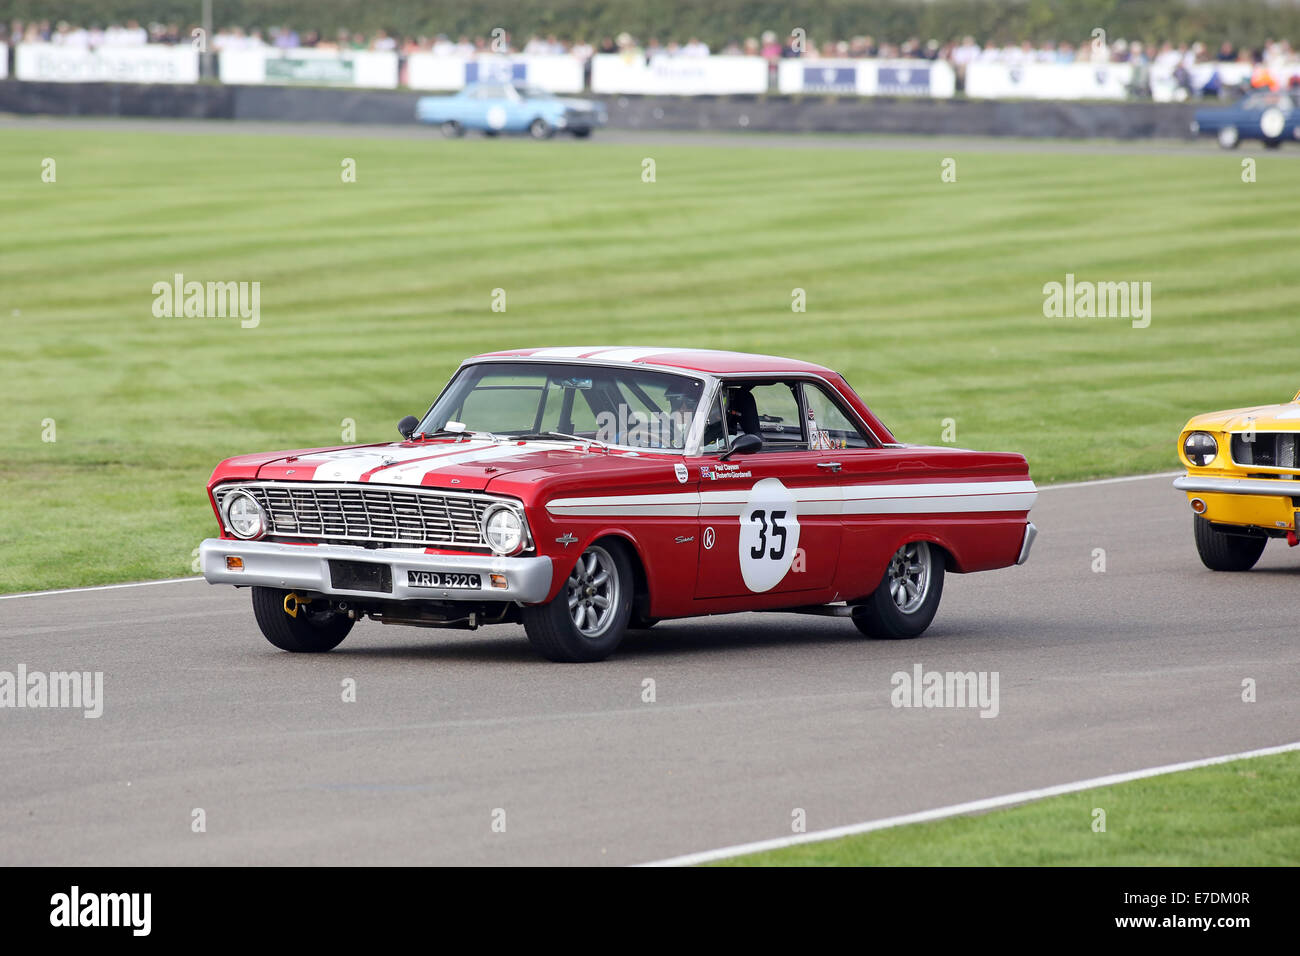 Chichester, West Sussex, UK. 13th Sep, 2014. Pictures from the Goodwood Revival 2014 - The Shelby Cup - A race for saloon cars powered by small-block V8 engines on the 60th anniversary of the small-block V8 engine. A large number of Ford Mustangs mariking the car's 50th anniversary took on other American classics such as Ford Falcon, Plymouth Barracuda, Mercury Comet Cyclone and Dodge Dart. Picture shows: a 1964 Ford Falcon Spirit driven by Paul Clayson Credit:  Oliver Dixon/Alamy Live News Stock Photo